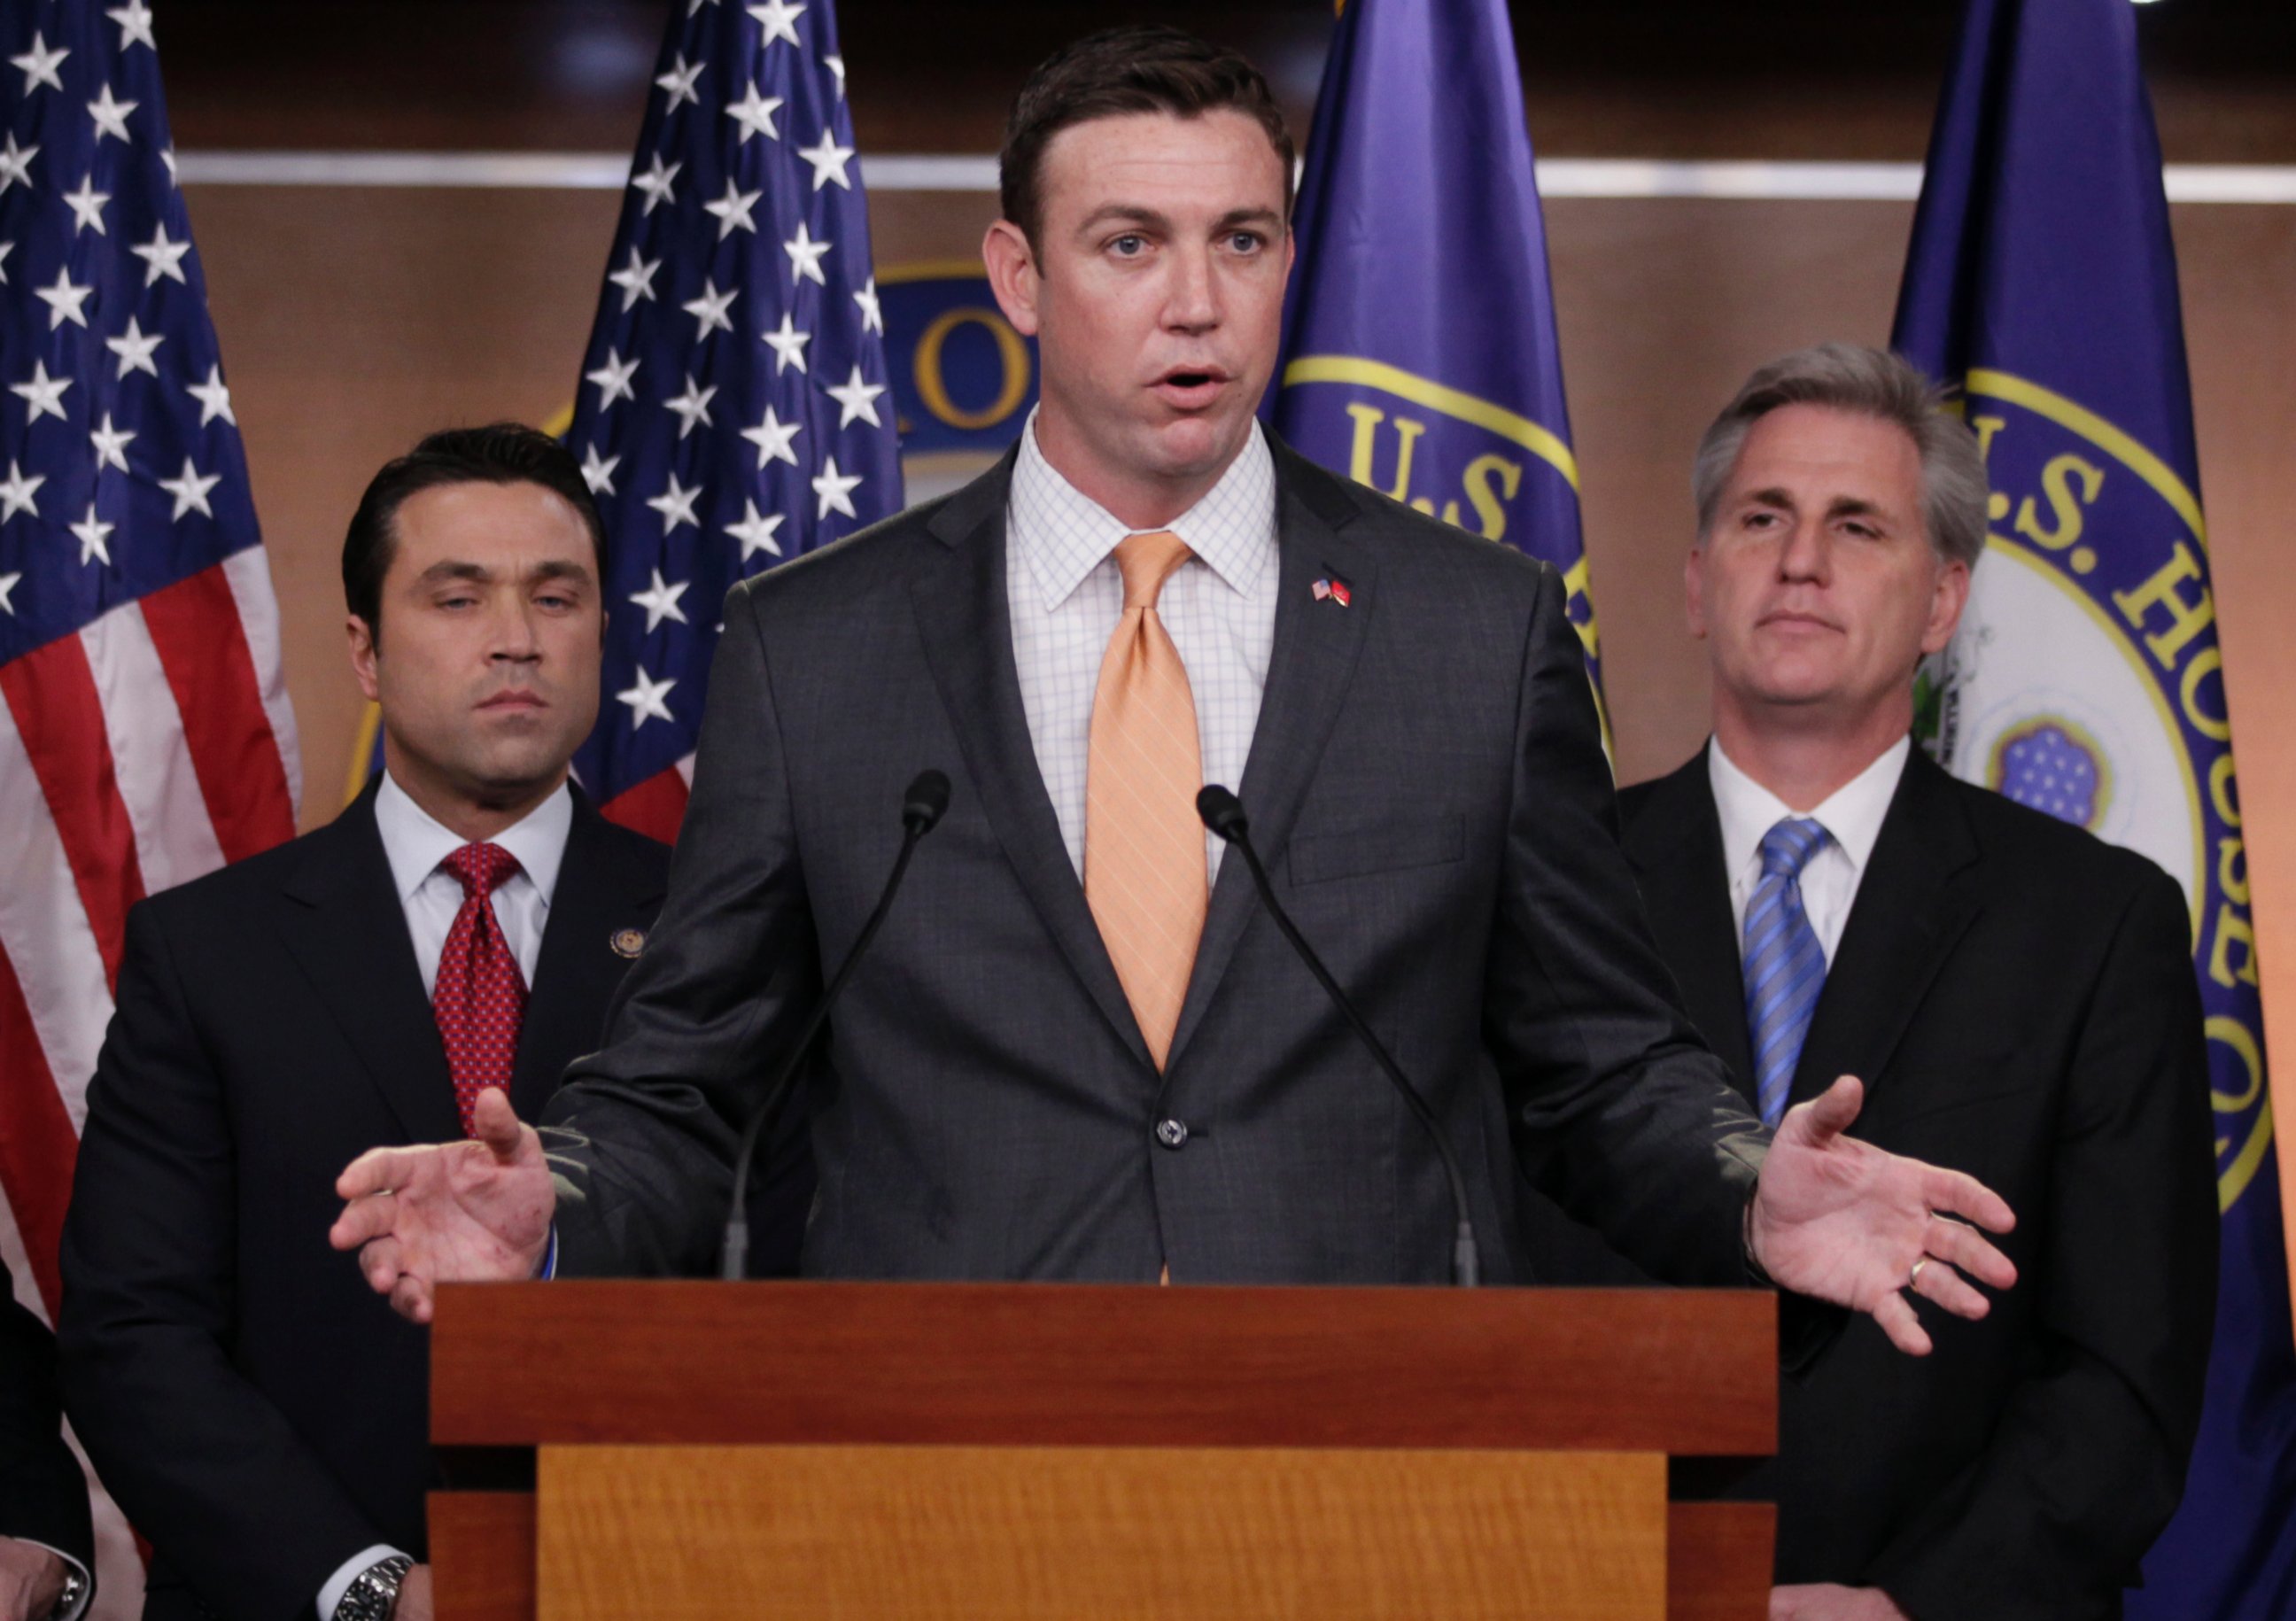 In this April 7, 2011 file photo, U.S. Rep. Duncan Hunter, R-Calif., center, speaks during a news conference on Capitol Hill.